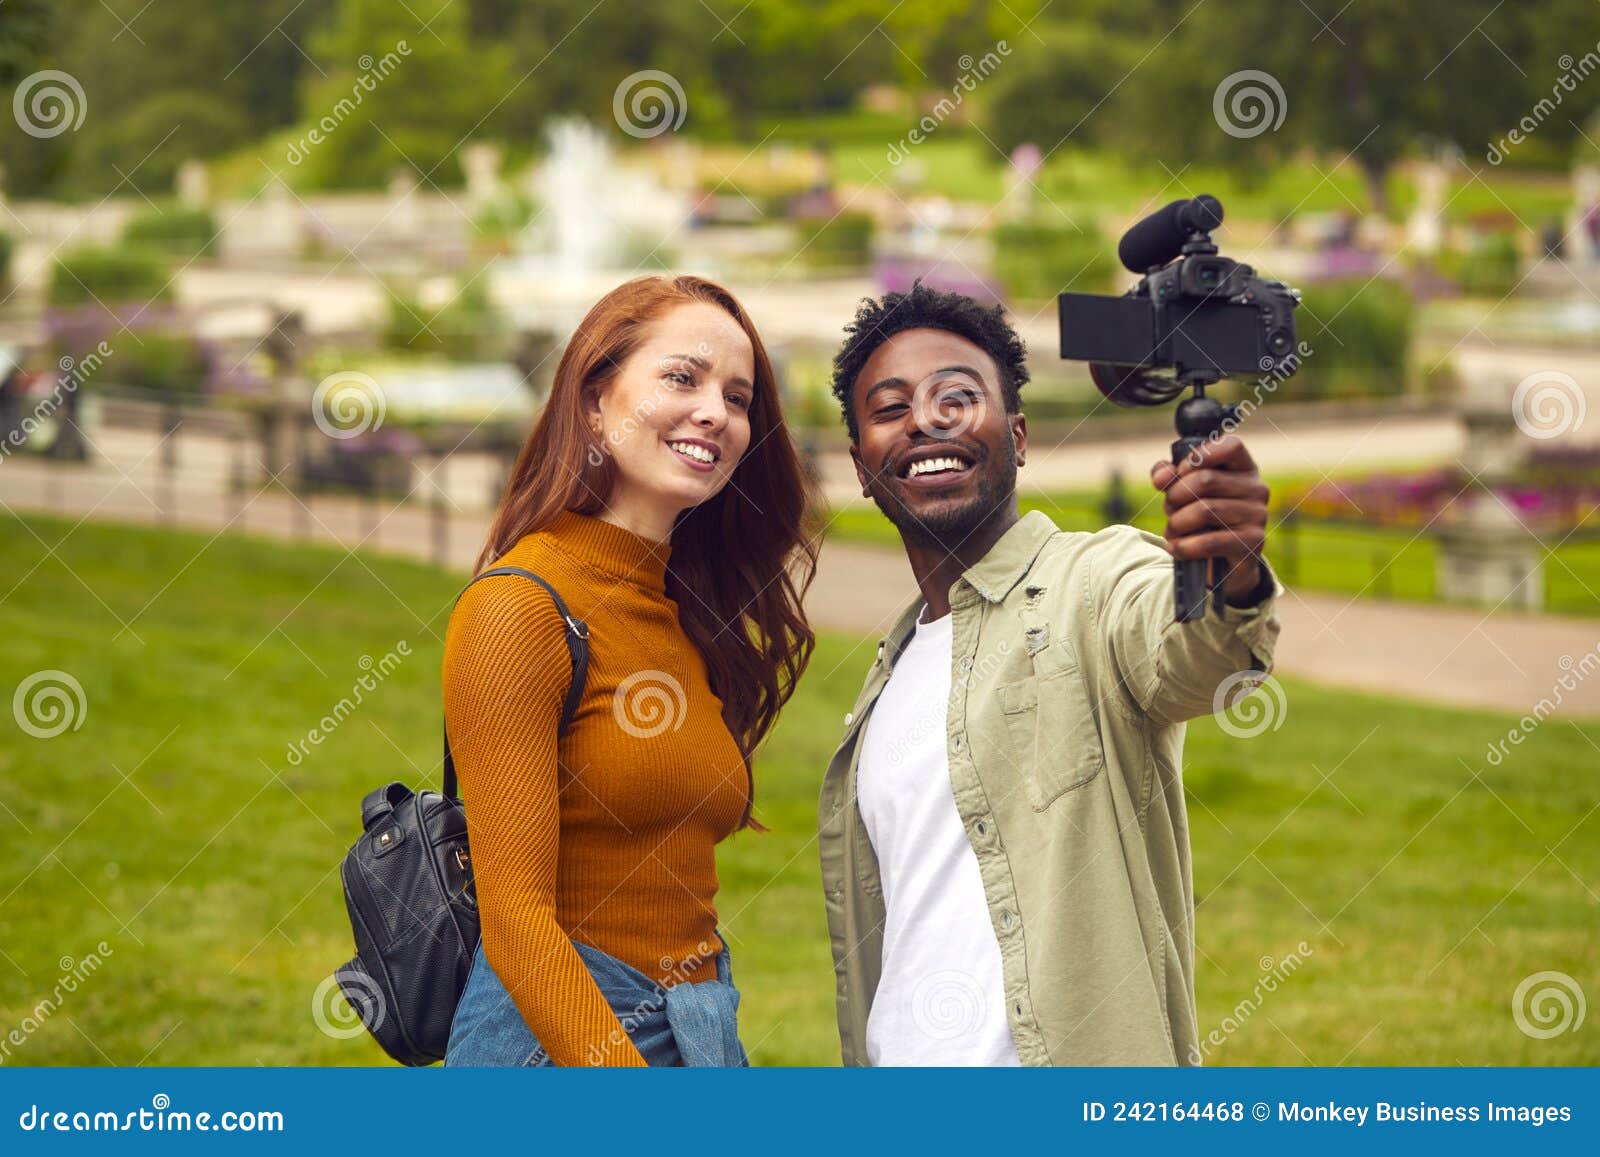 young couple travelling through city park together vlogging to video camera on handheld tripod